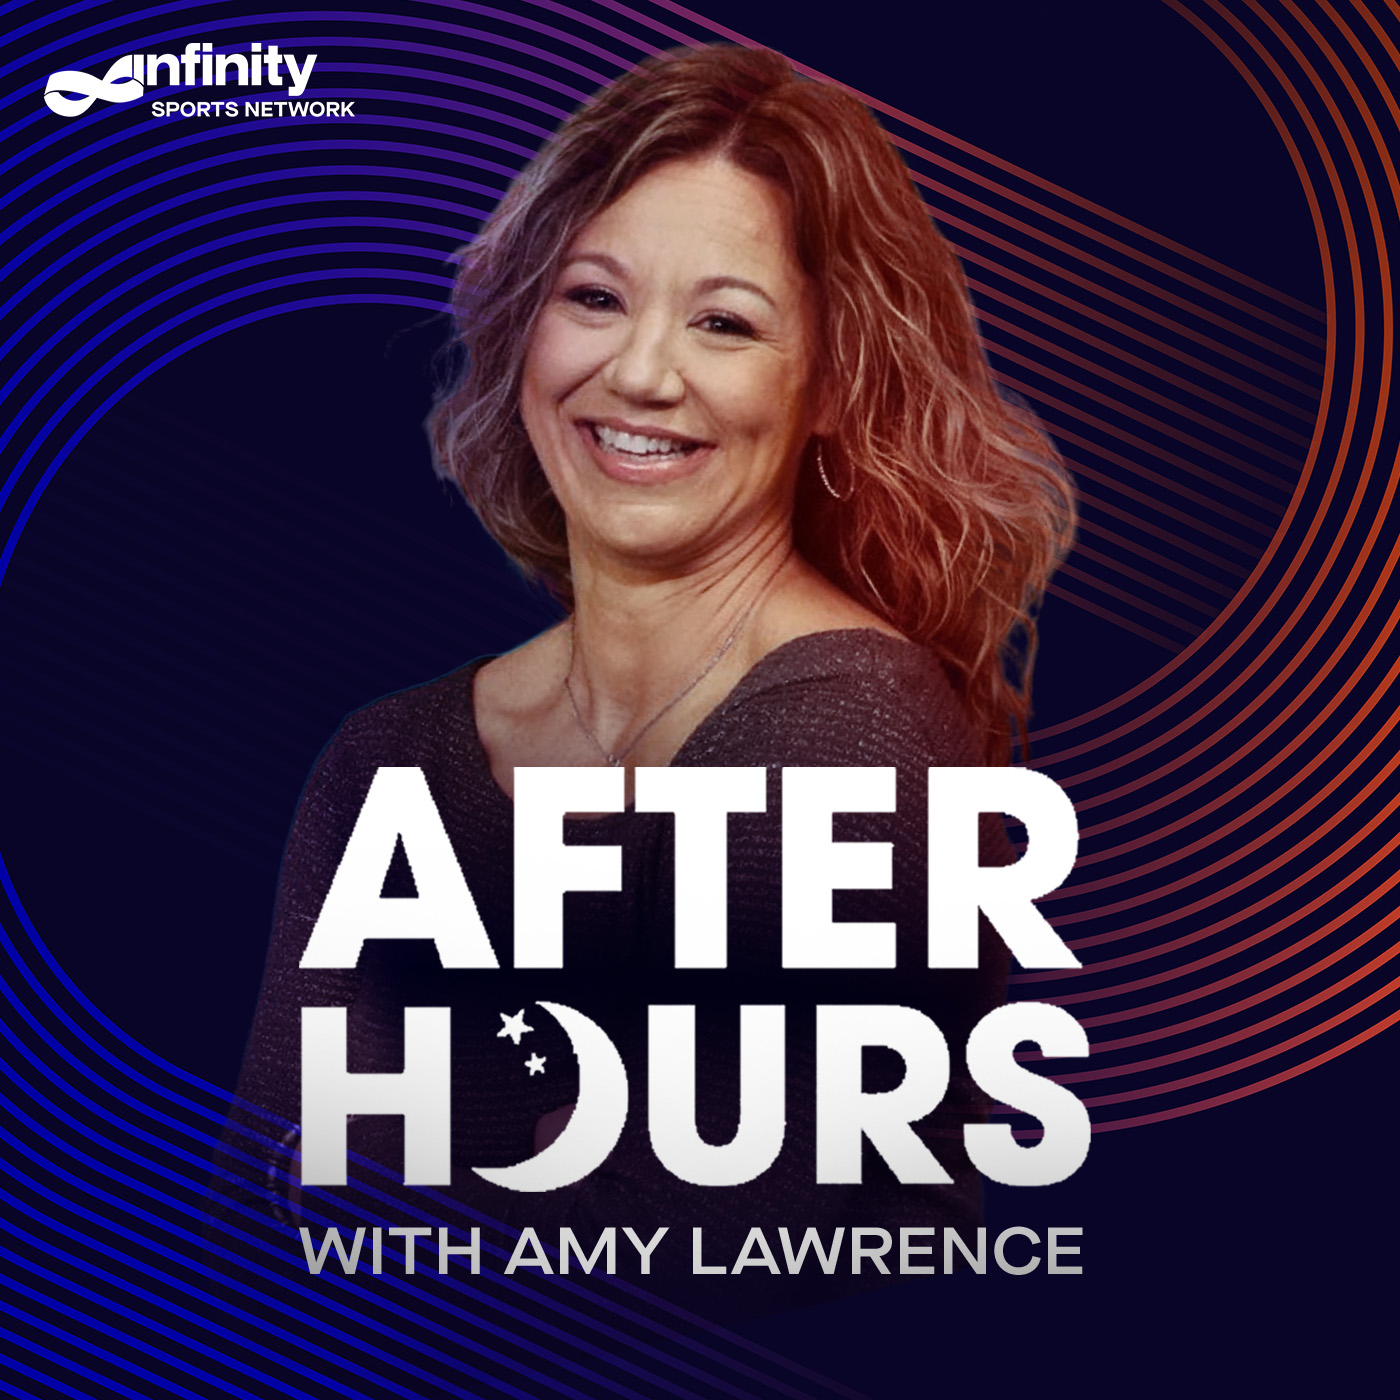 2-14-22 After Hours with Amy Lawrence PODCAST: Hour 4